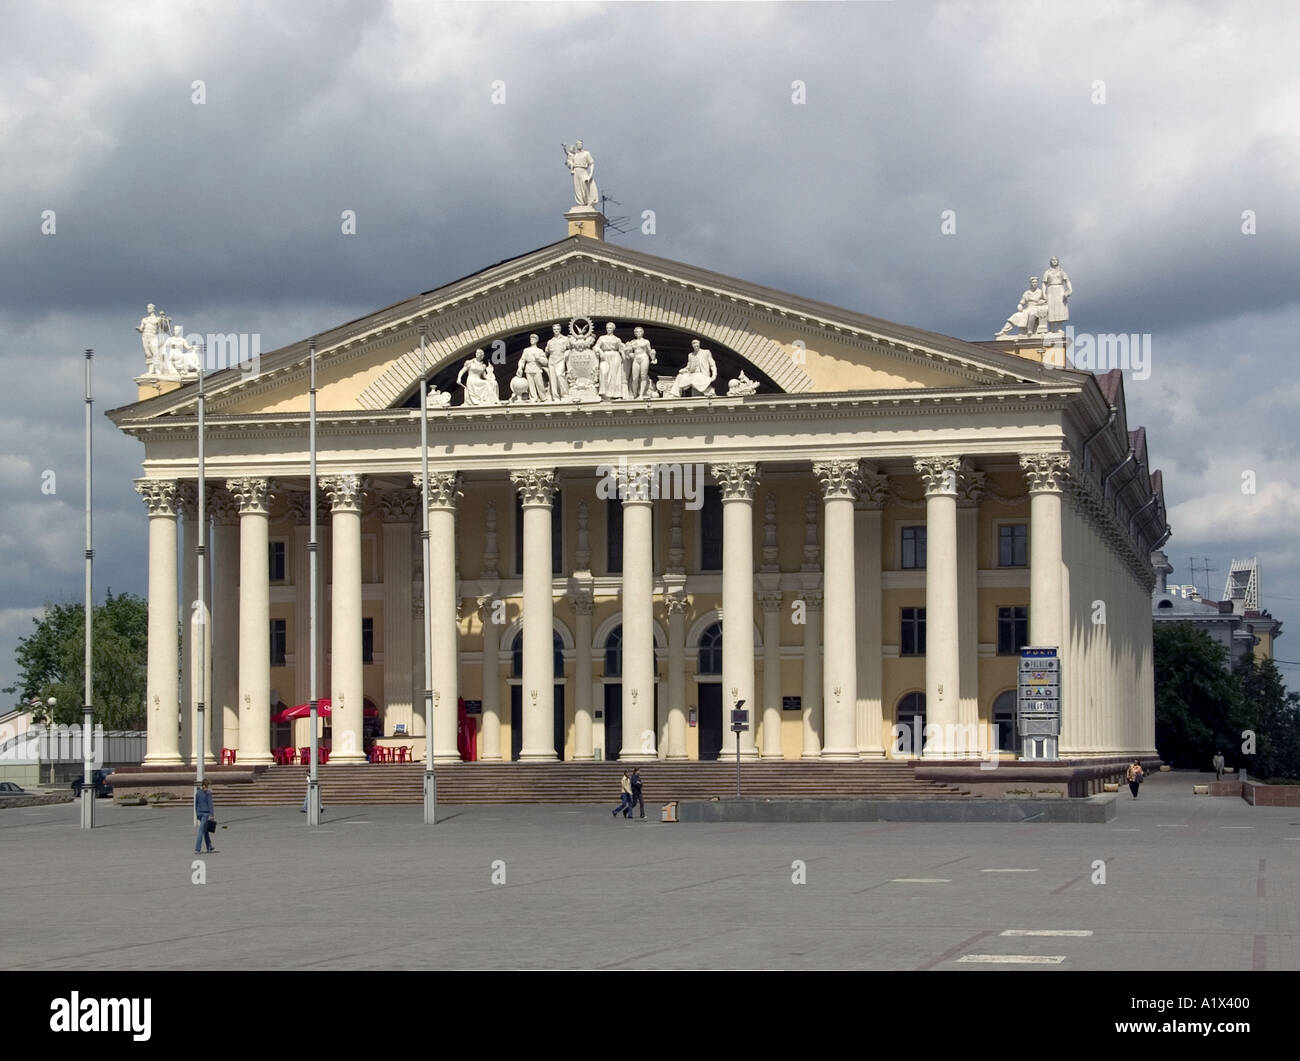 Trade Unions Palace of Culture, former trade union headquarters in Minsk, Belarus Stock Photo